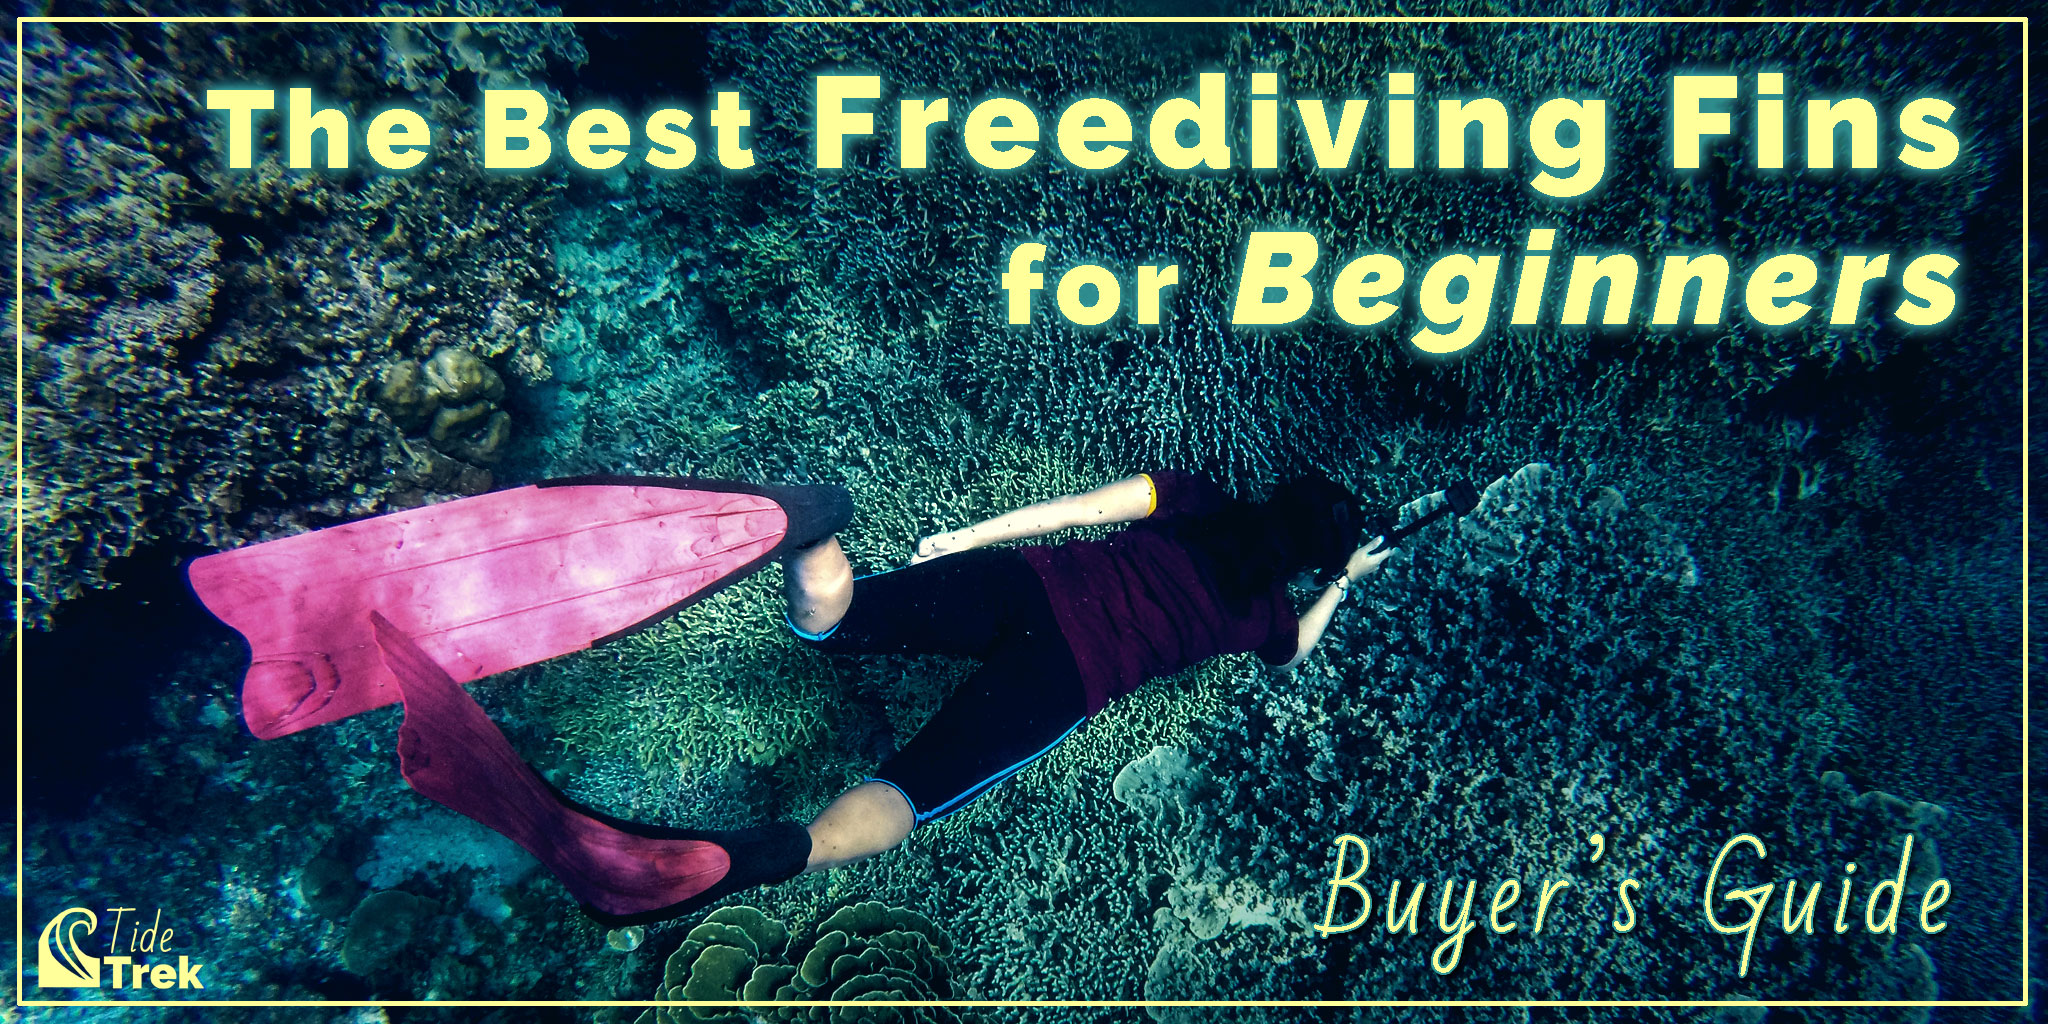 The best freediving fins for beginners: A buyer's guide.